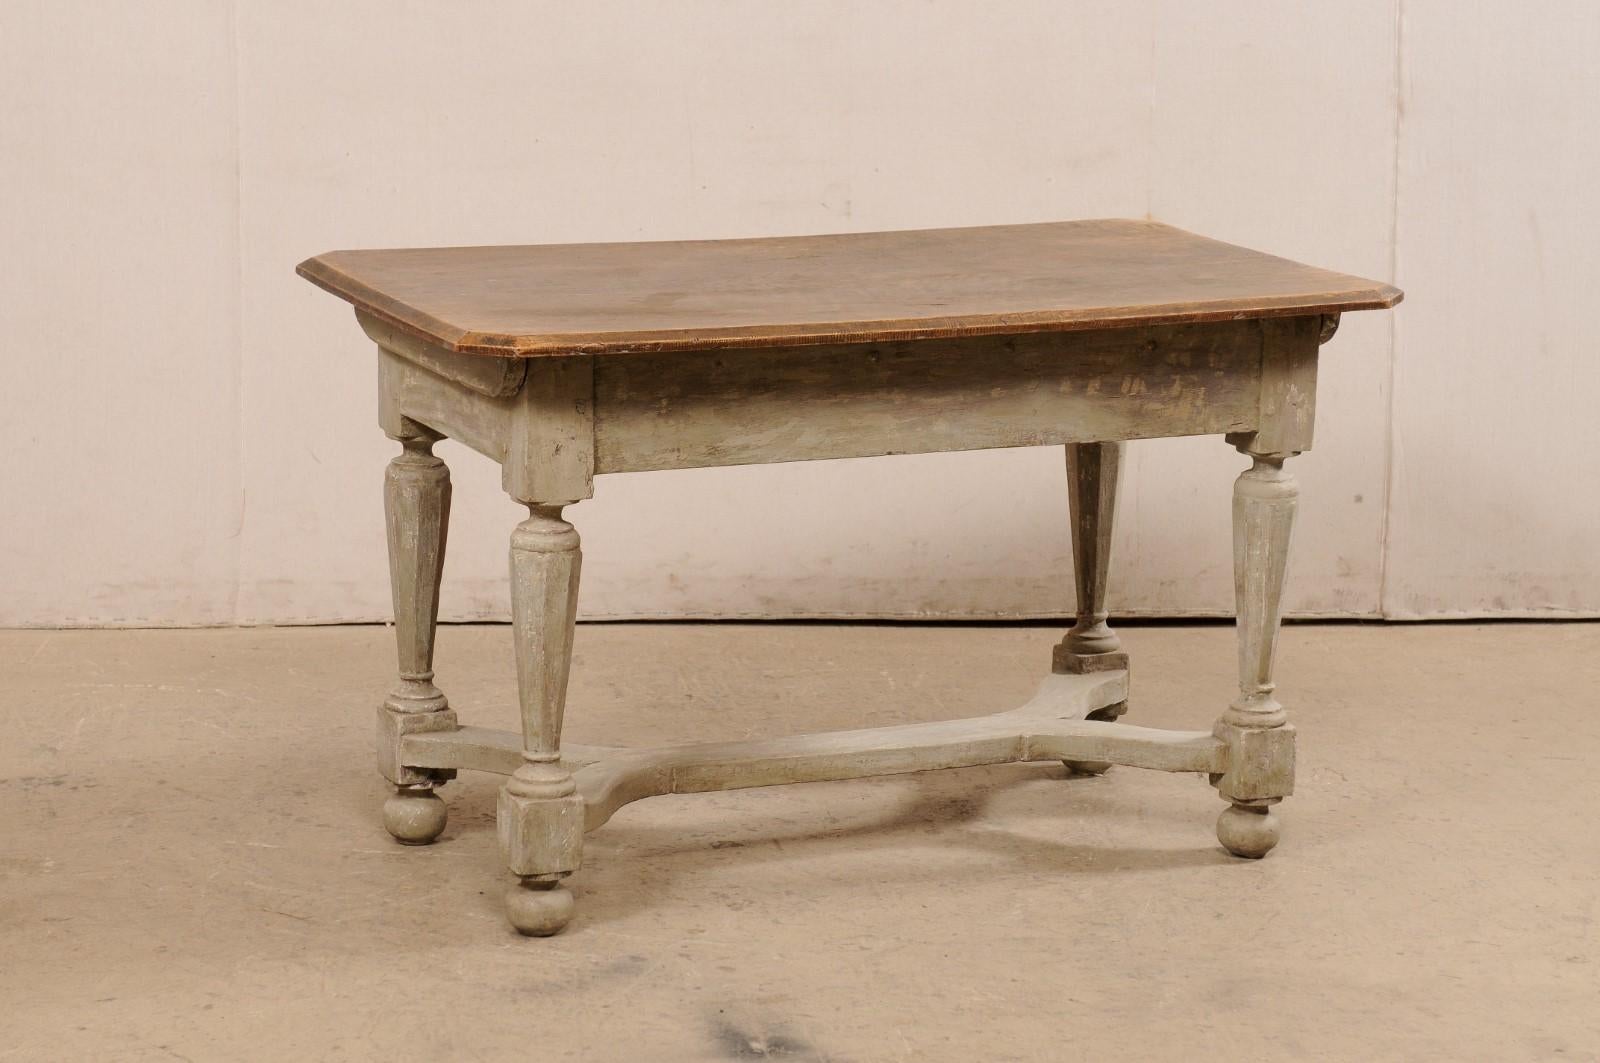 A Swedish period Baroque painted wood occasional table from the turn of the 17th and 18th century. This antique table from Sweden has a rectangular-shaped elm wood top with angular/canted corner edges, atop a thick apron, and presented upon nicely